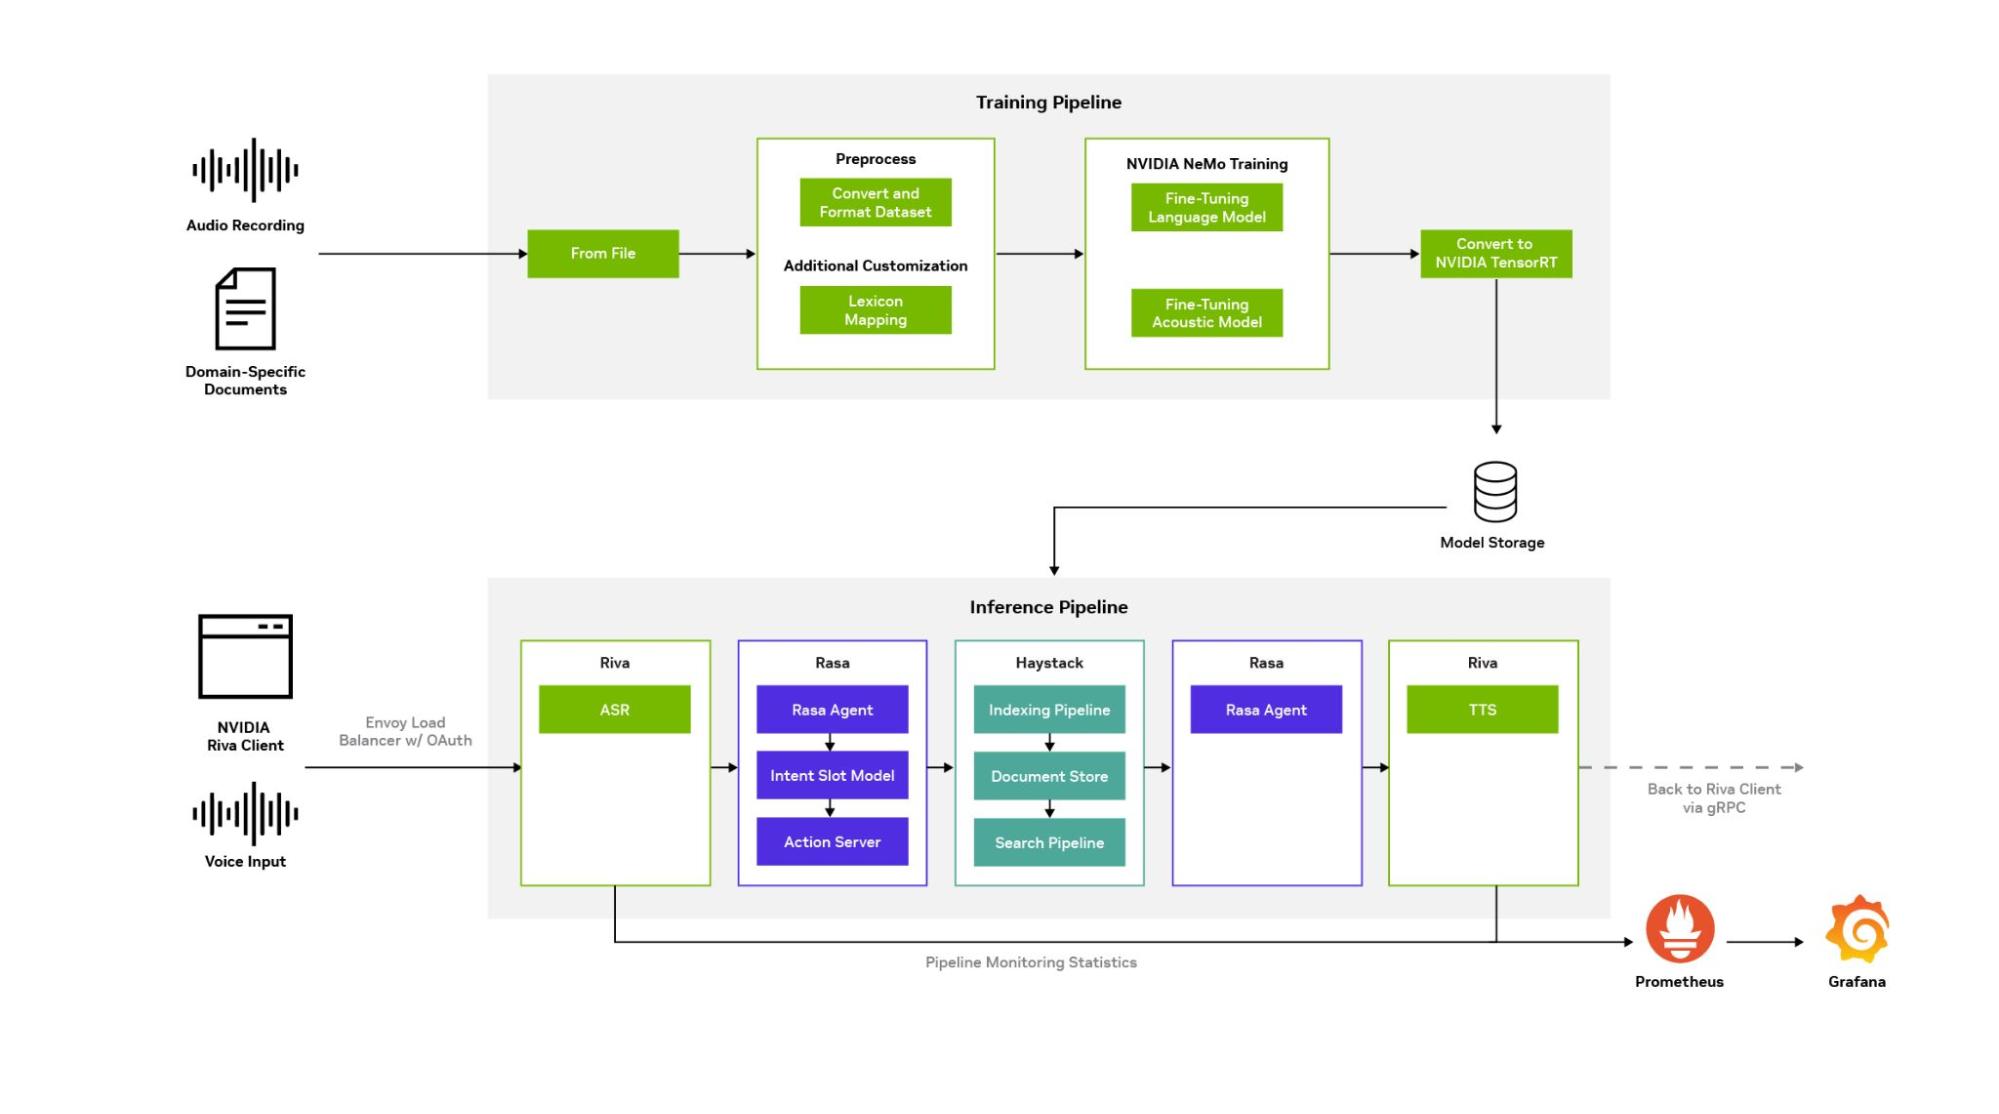 Diagram showing full architecture design to build and deploy an intelligent virtual assistant using NVIDIA Riva, Rasa Dialog Manager, and Haystack.